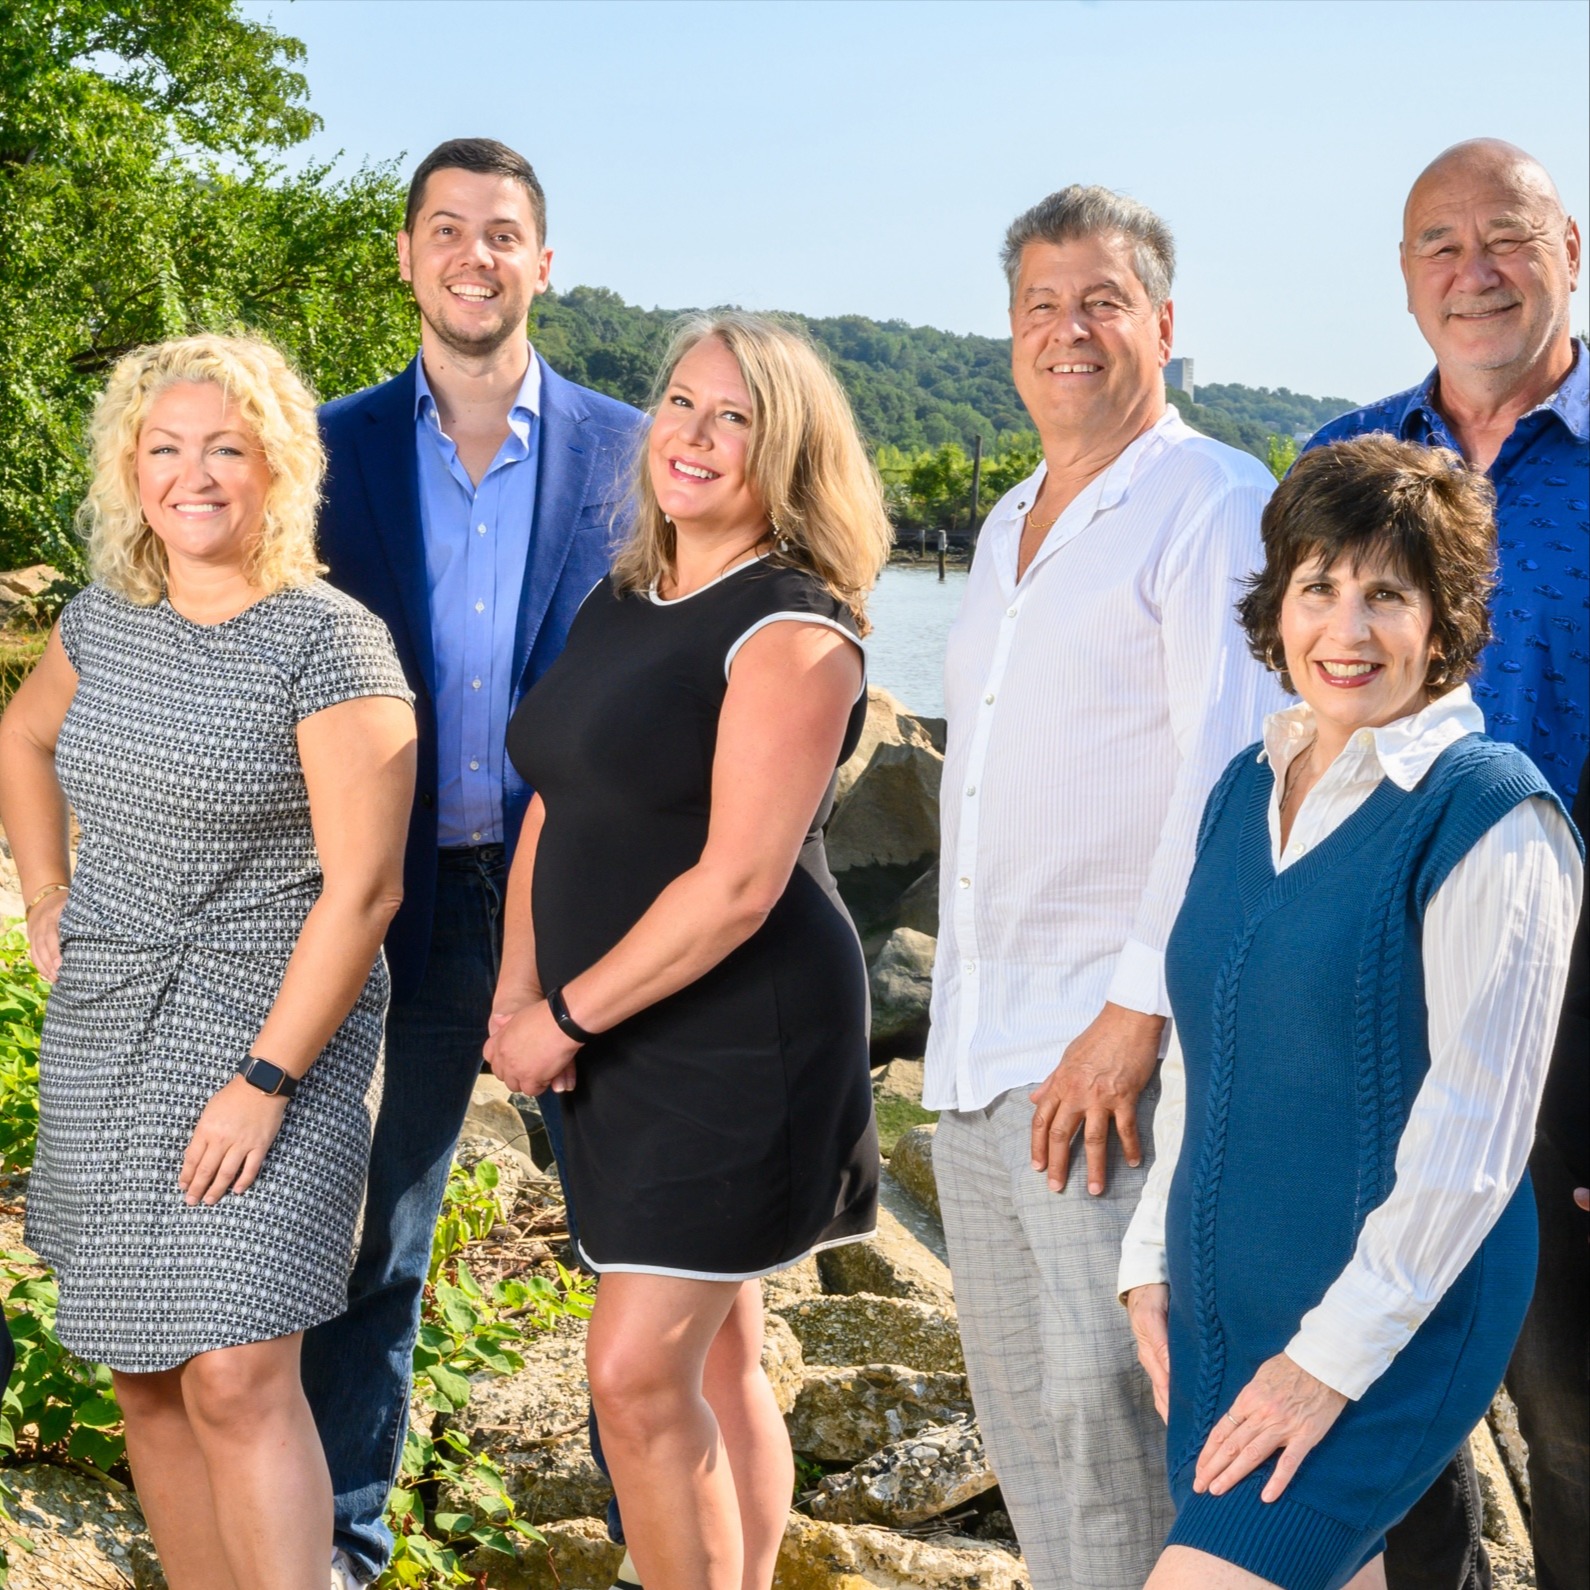 The Riolo Team at Compass, Agent in  - Compass